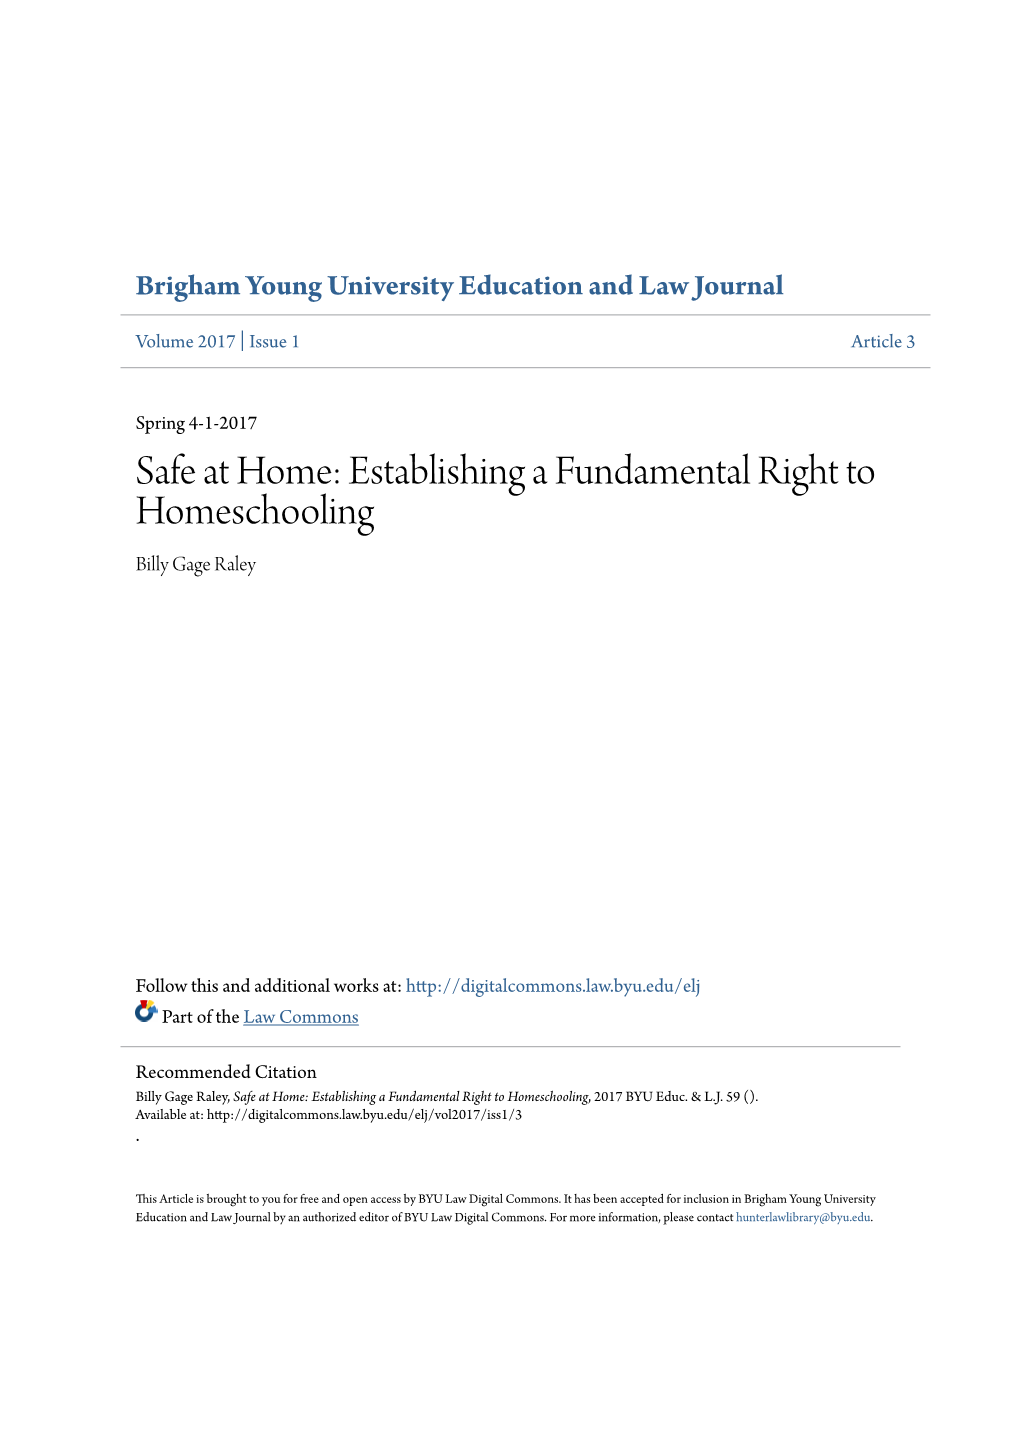 Safe at Home: Establishing a Fundamental Right to Homeschooling Billy Gage Raley